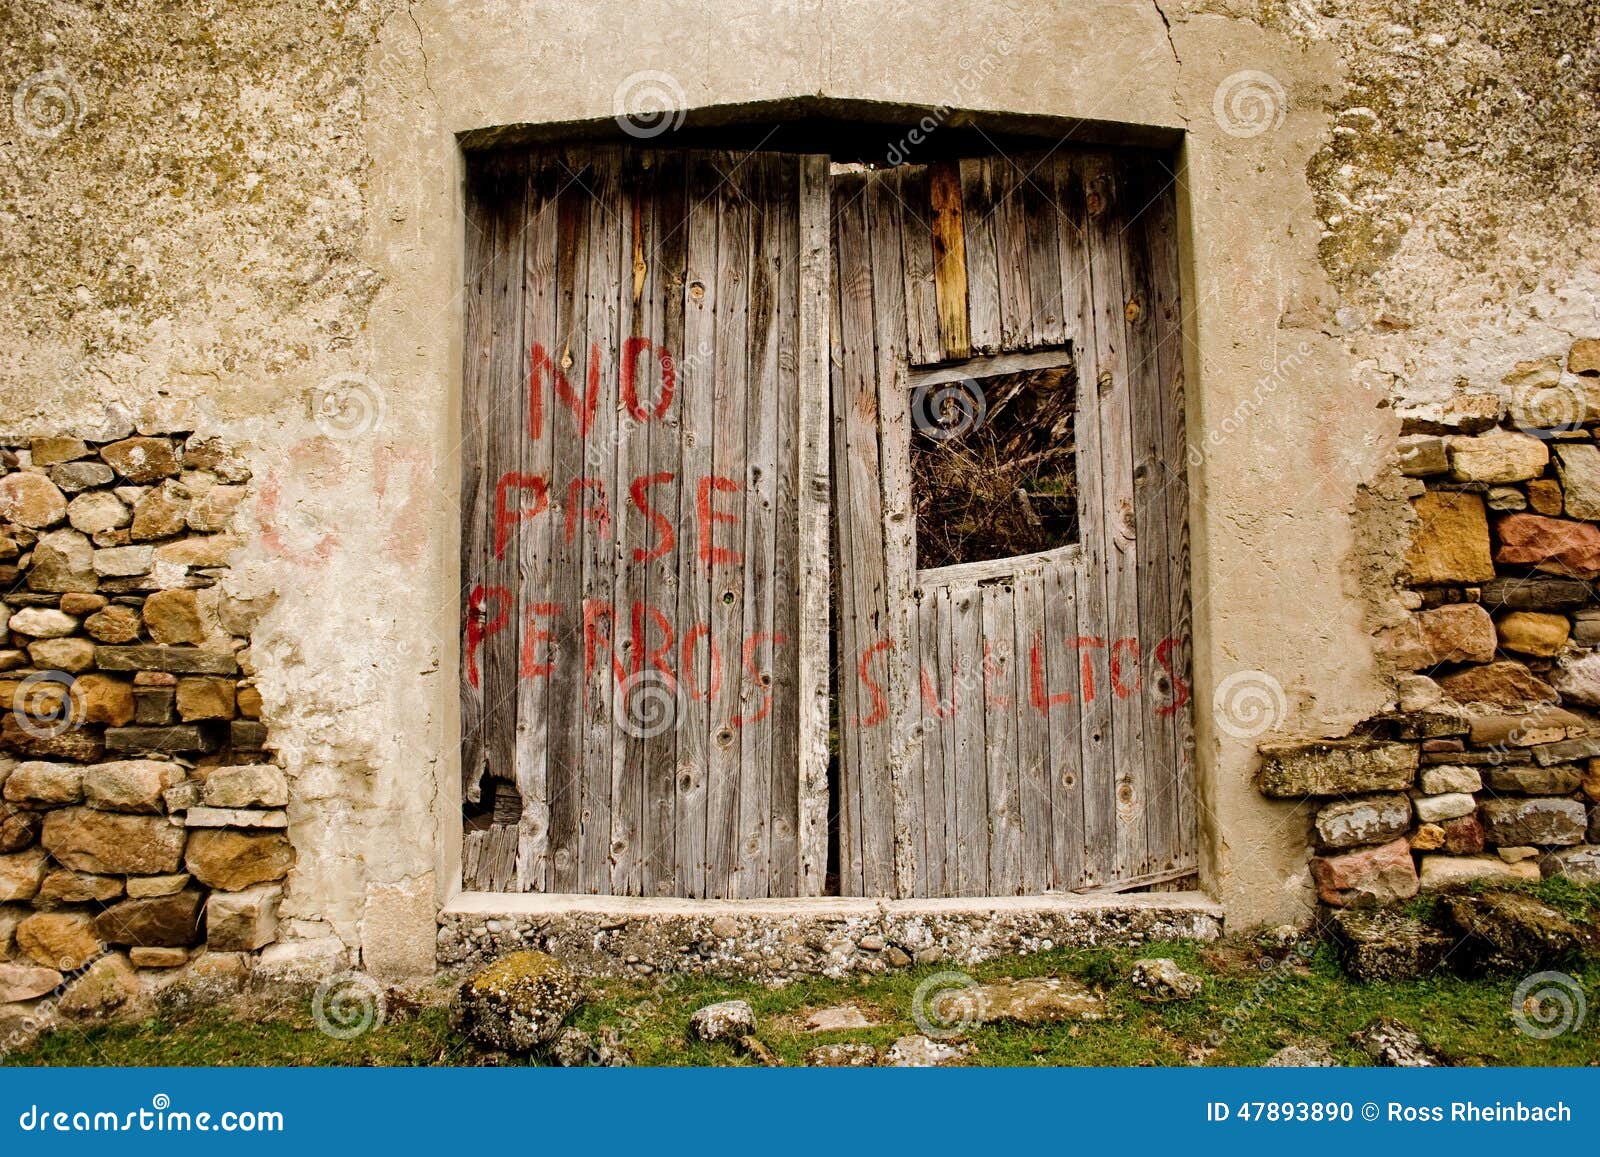 no entry, aggressive dogs, abandoned spanish house